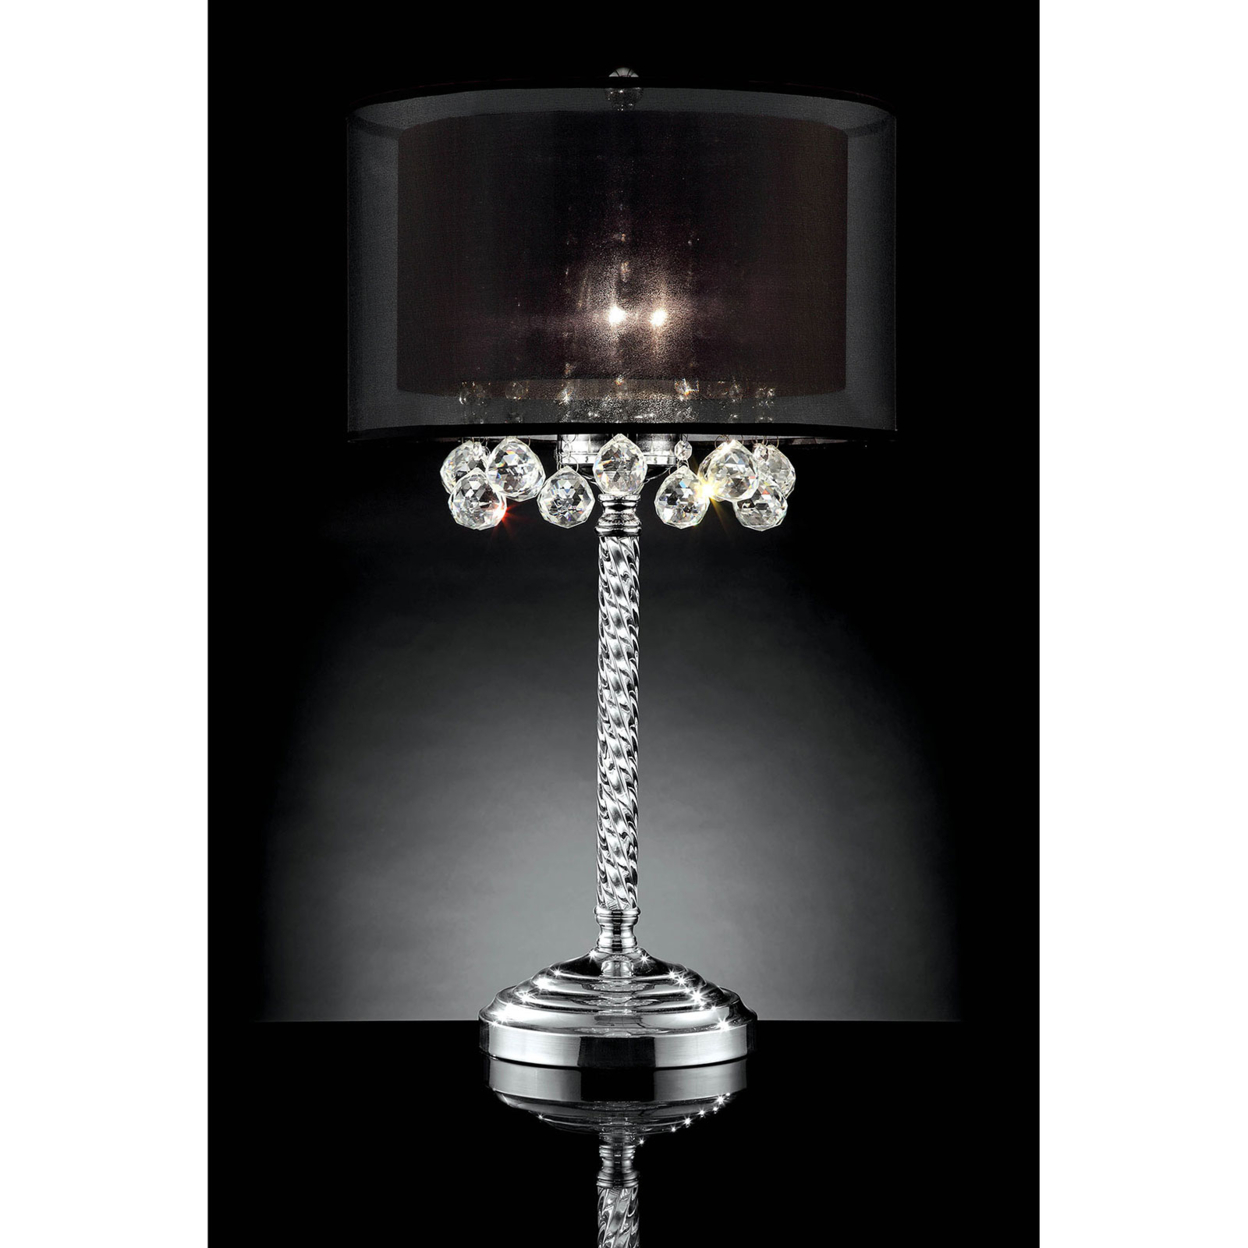 Table Lamp With Twisted Crystal Stand And Hanging Cystal Droplets, Silver- Saltoro Sherpi